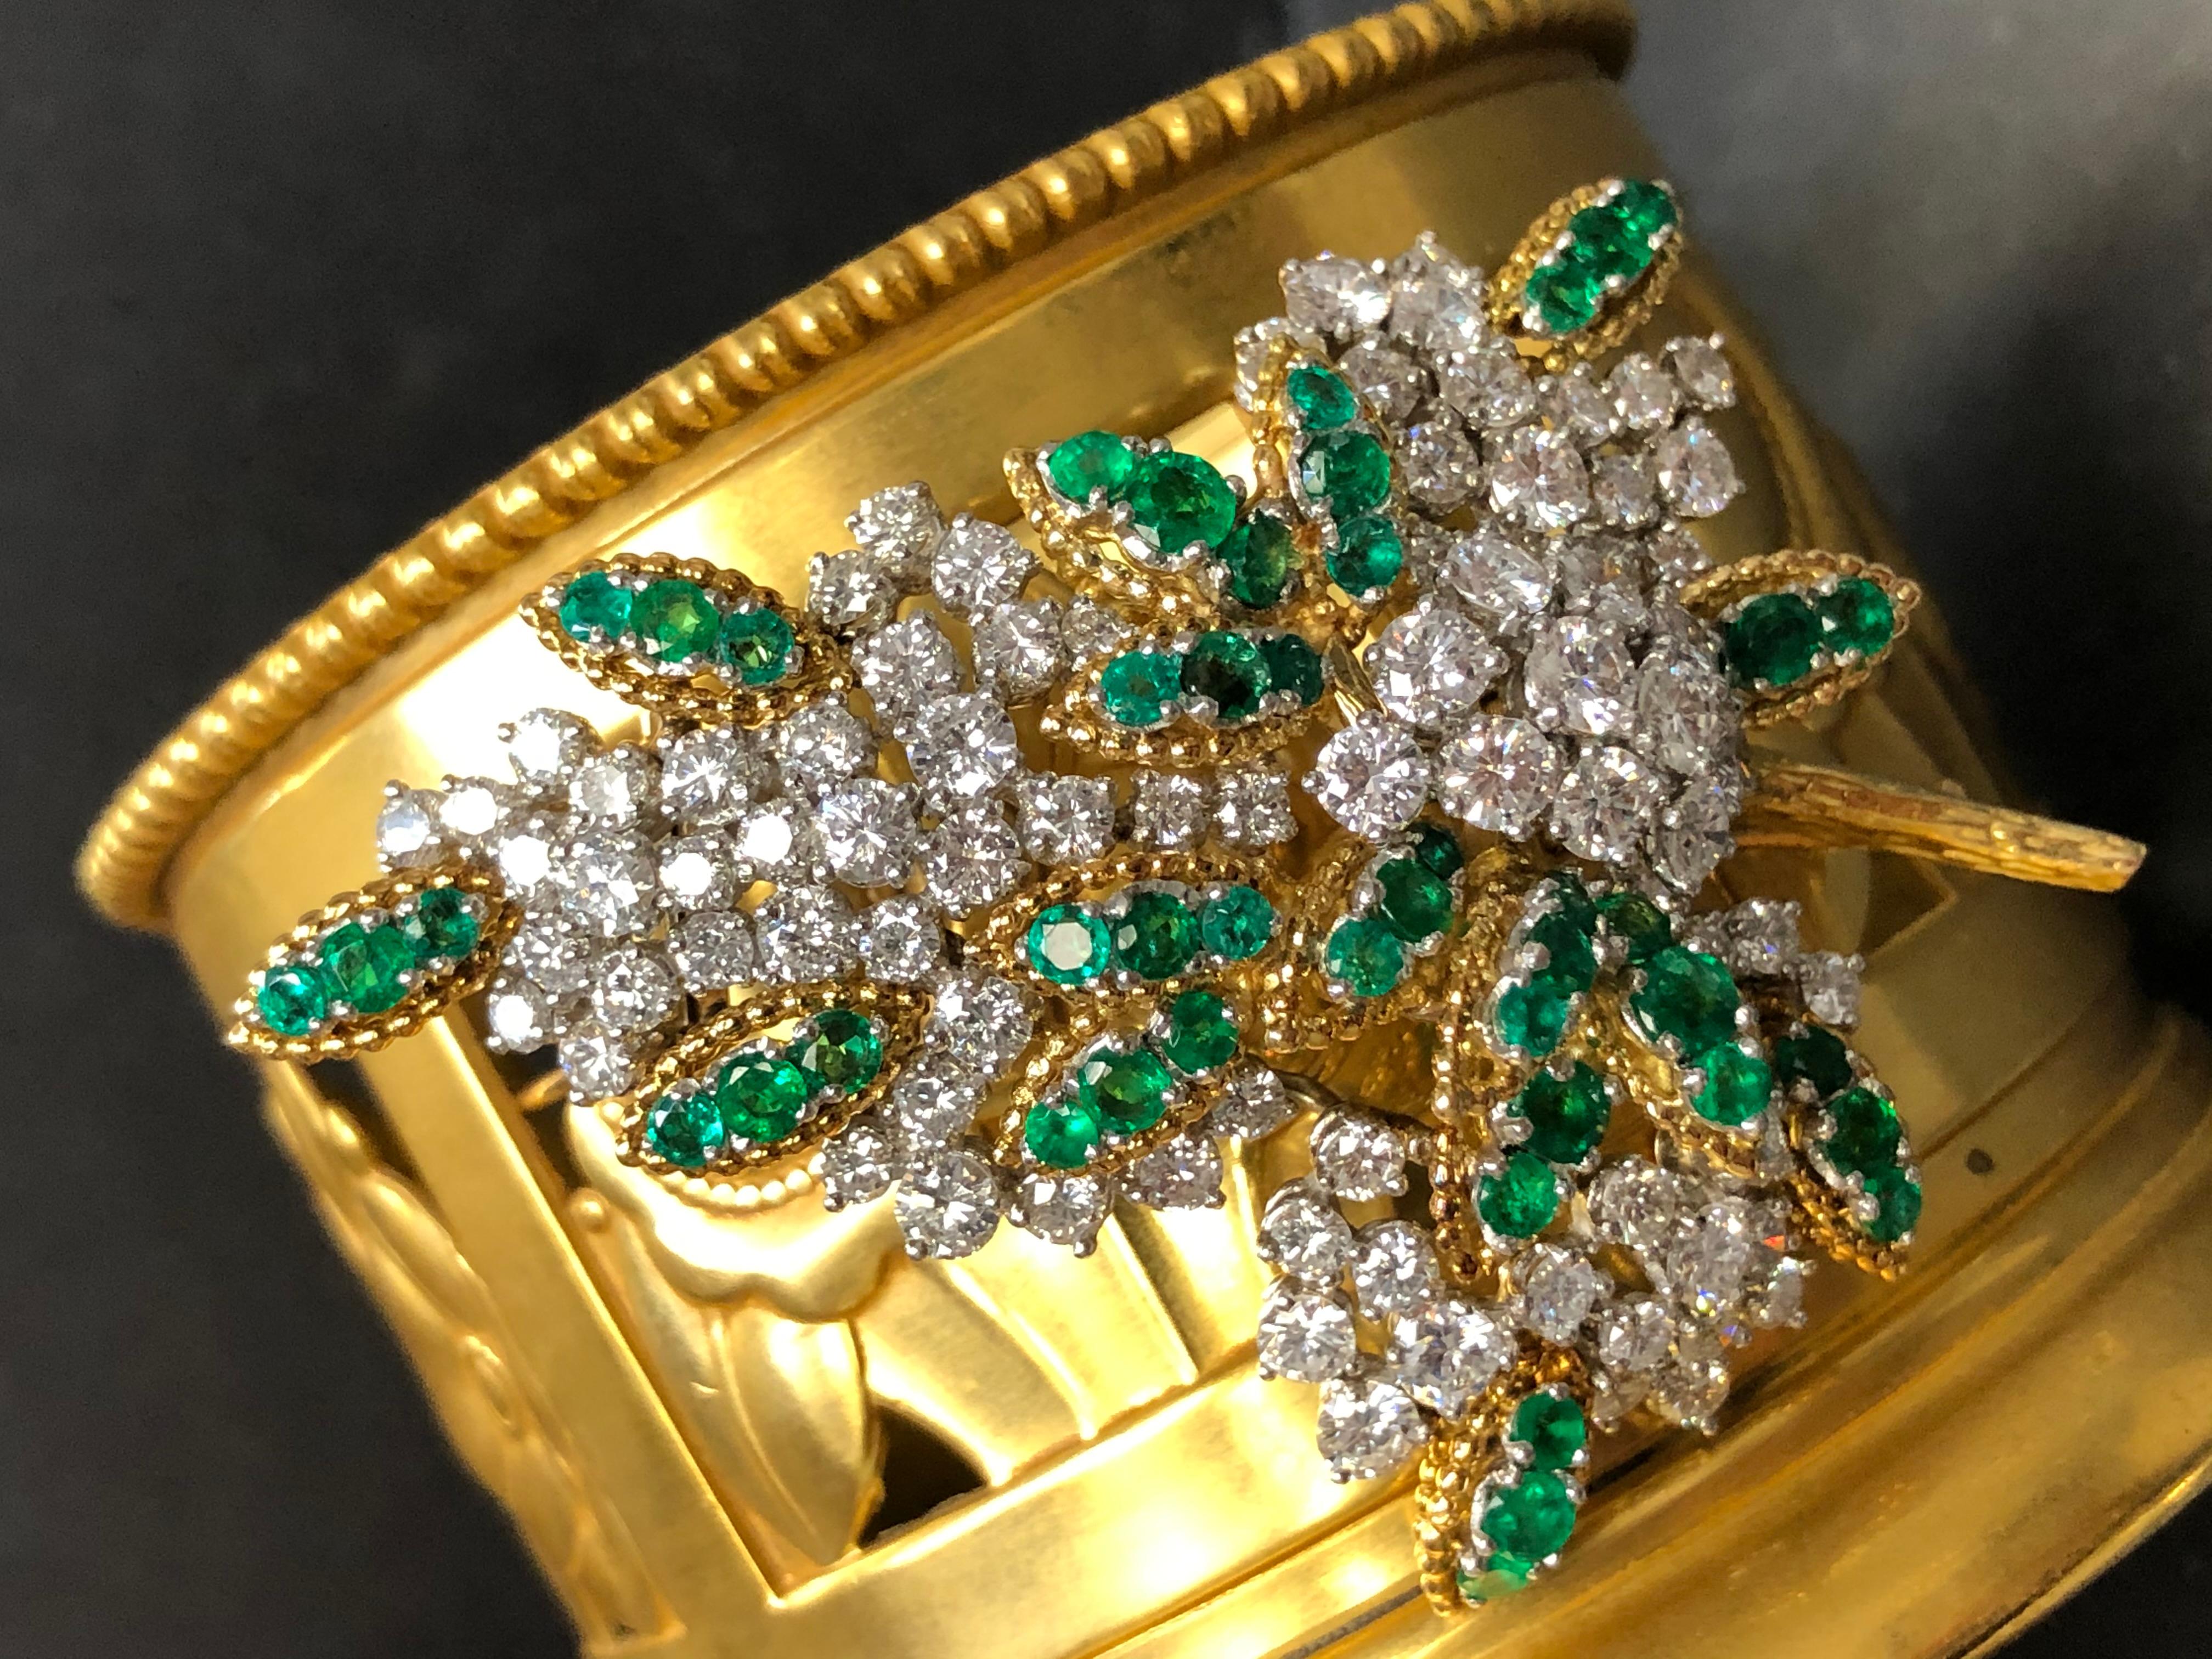 Vintage French 18K Platinum Diamond Emerald Leaf Brooch 13cttw G Vs In Good Condition For Sale In Winter Springs, FL